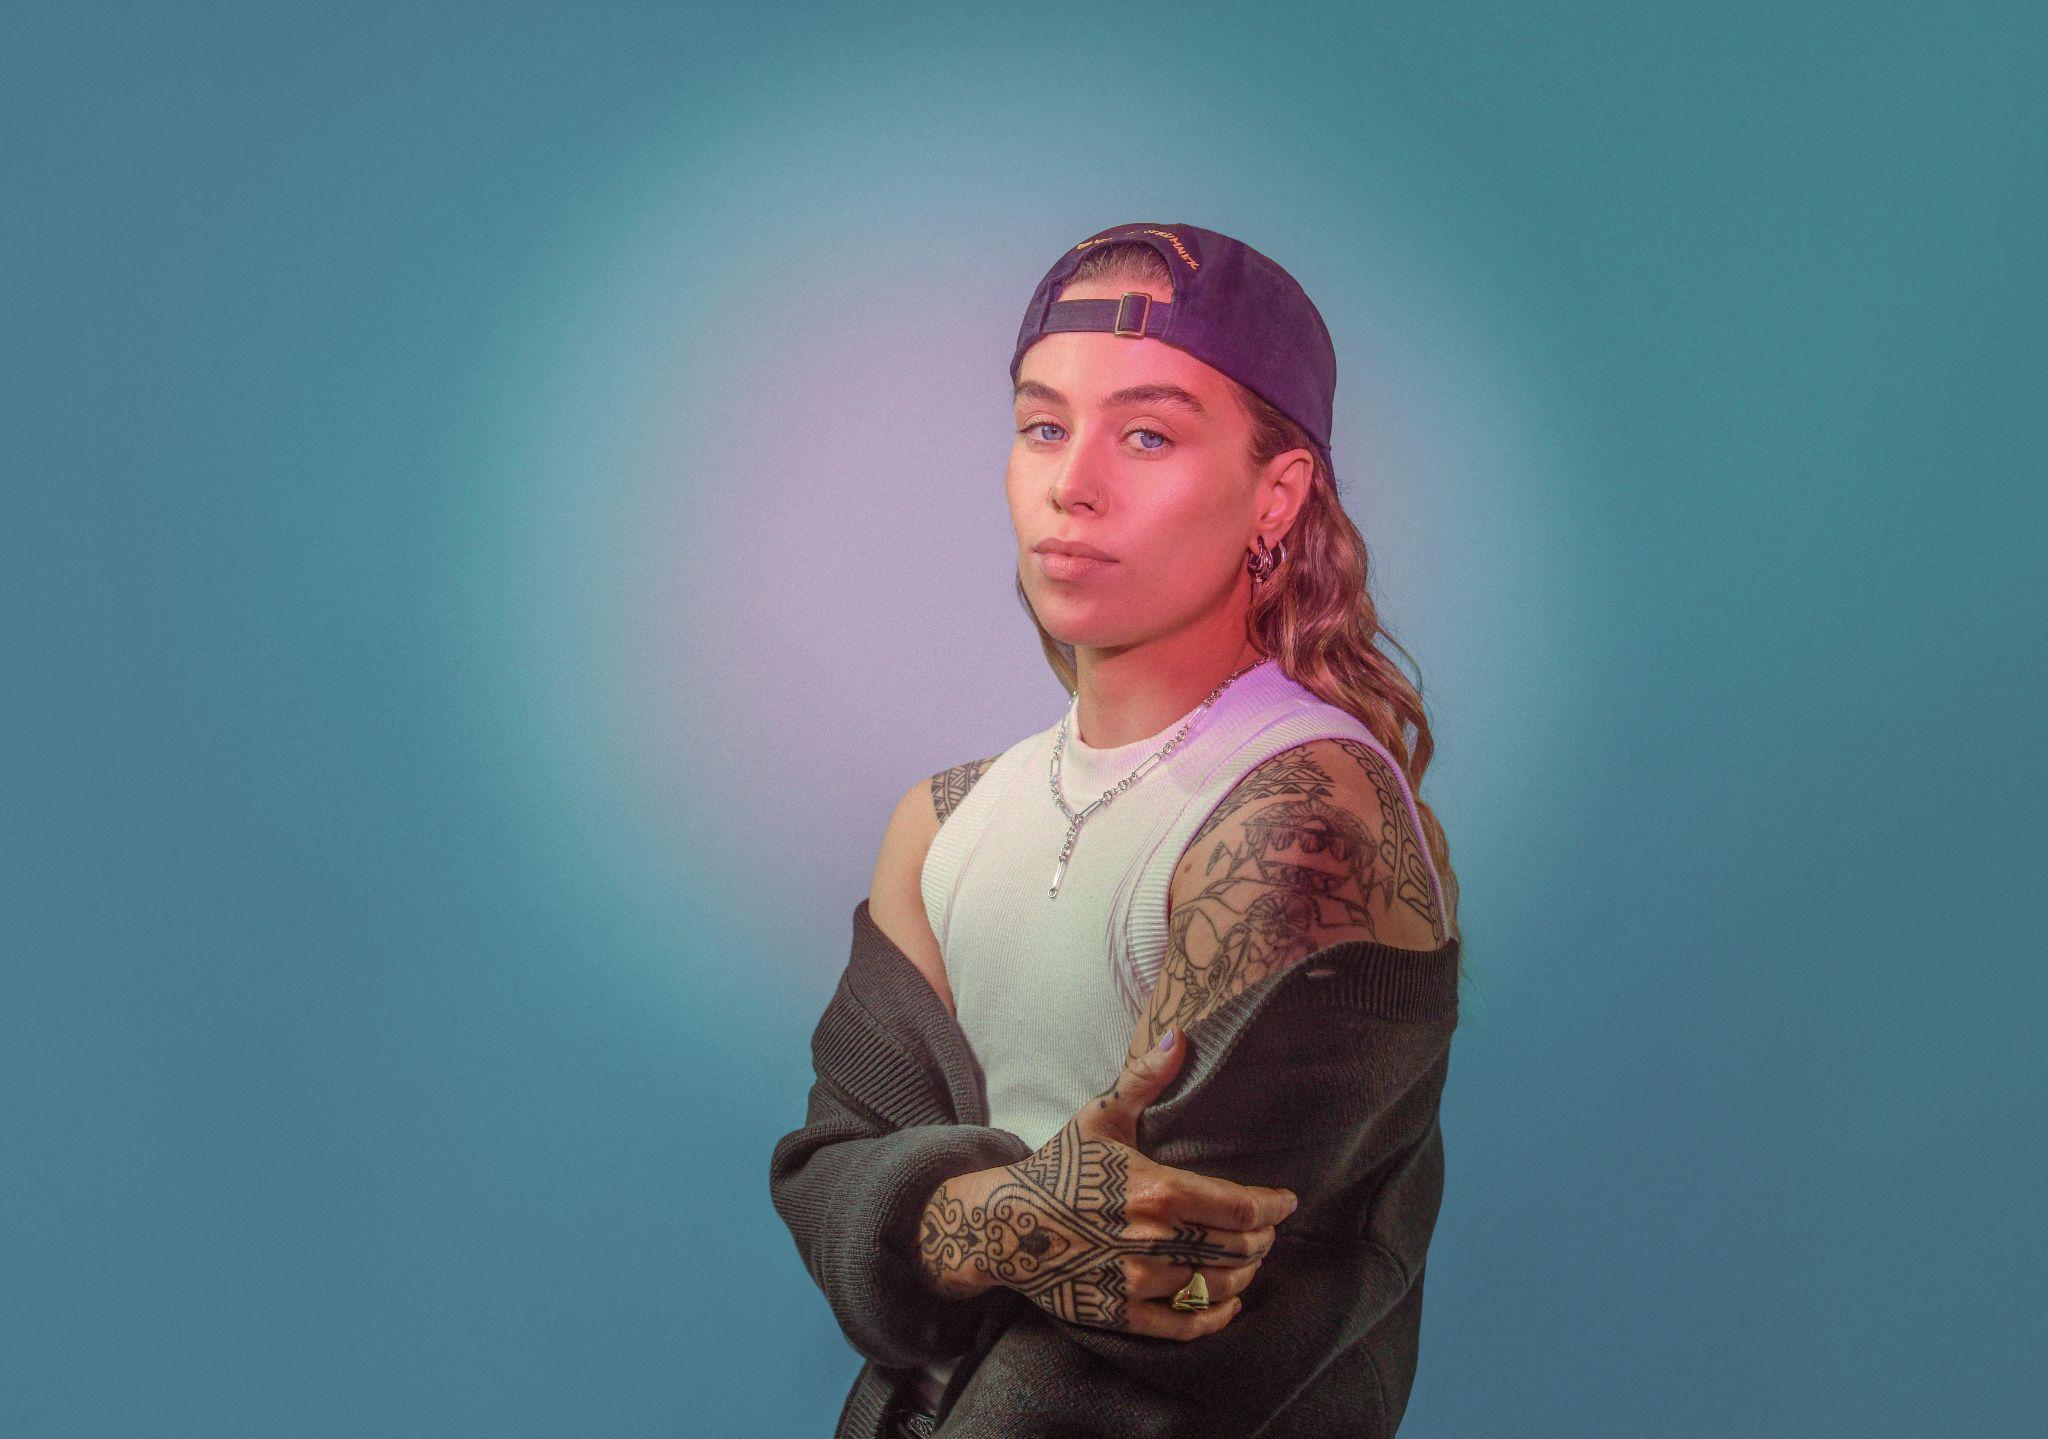 Tash Sultana to release debut Notion EP on Mom + Pop, sells out U.S. tour